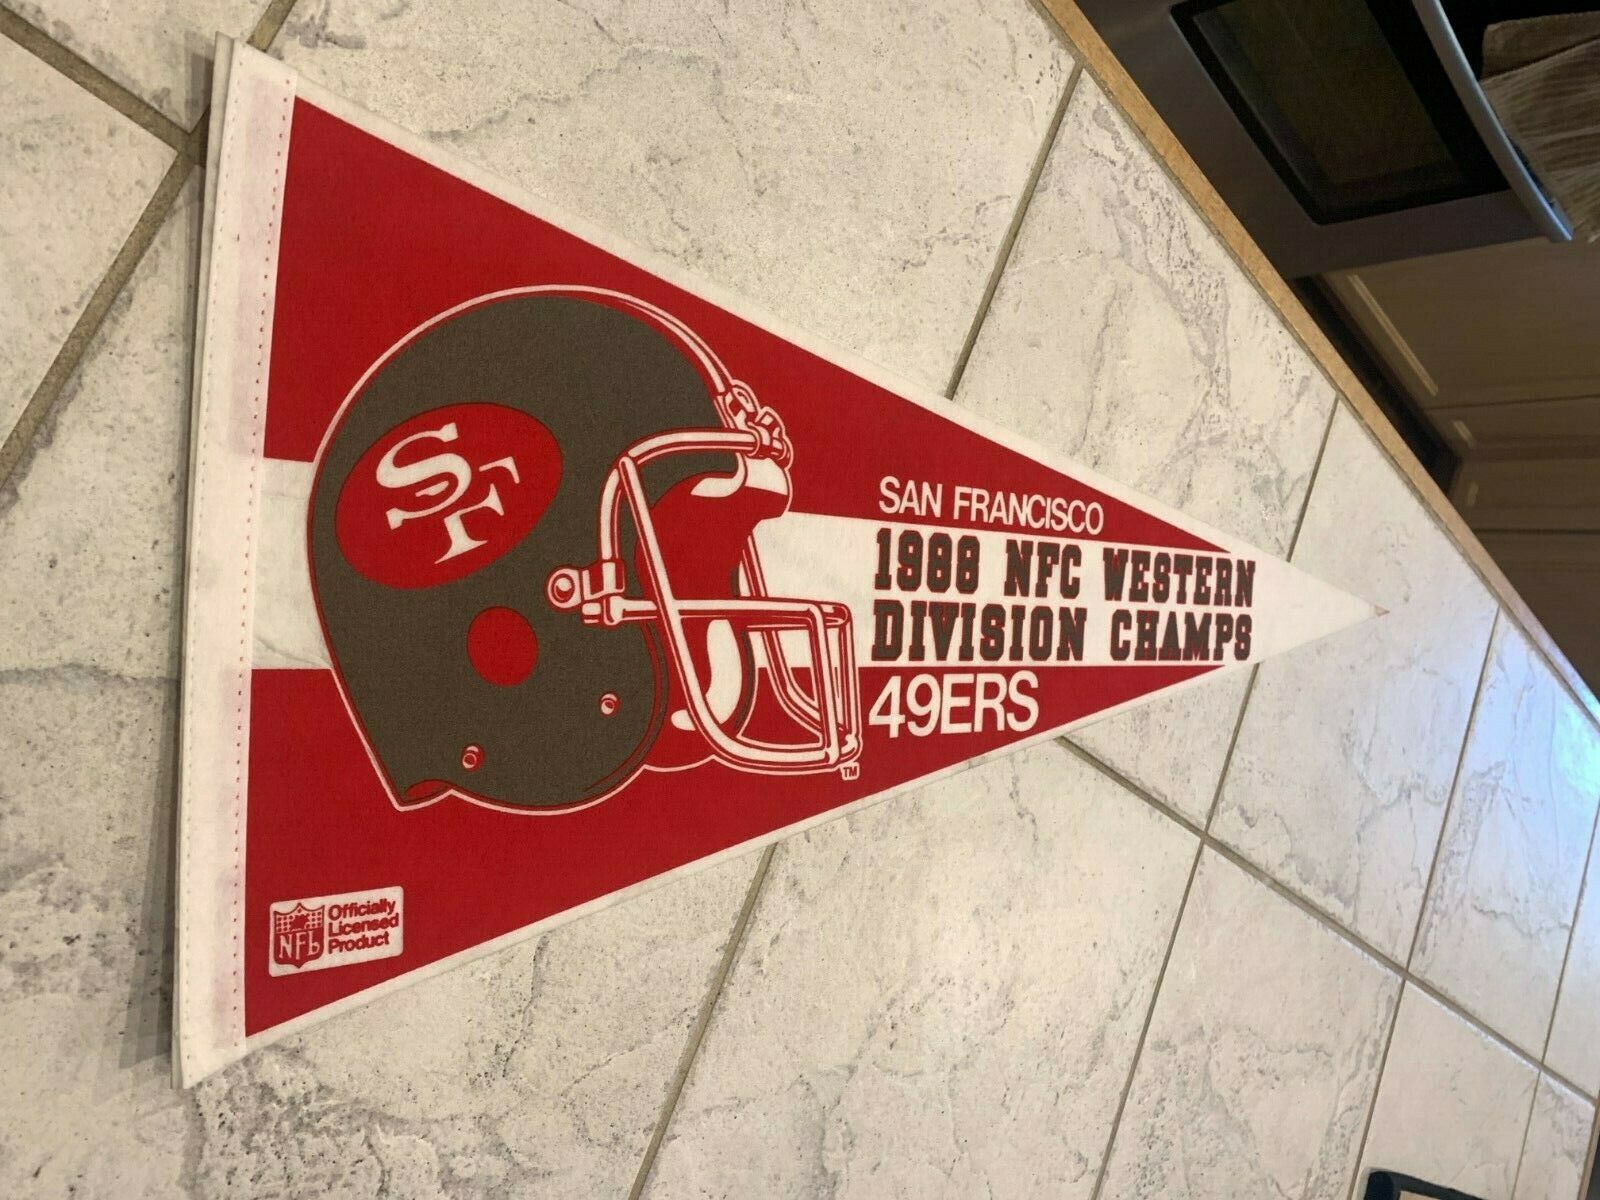 1988 San Francisco 49ers Nfc Western Division Champs Pennant 12x29 Full Size Nfl